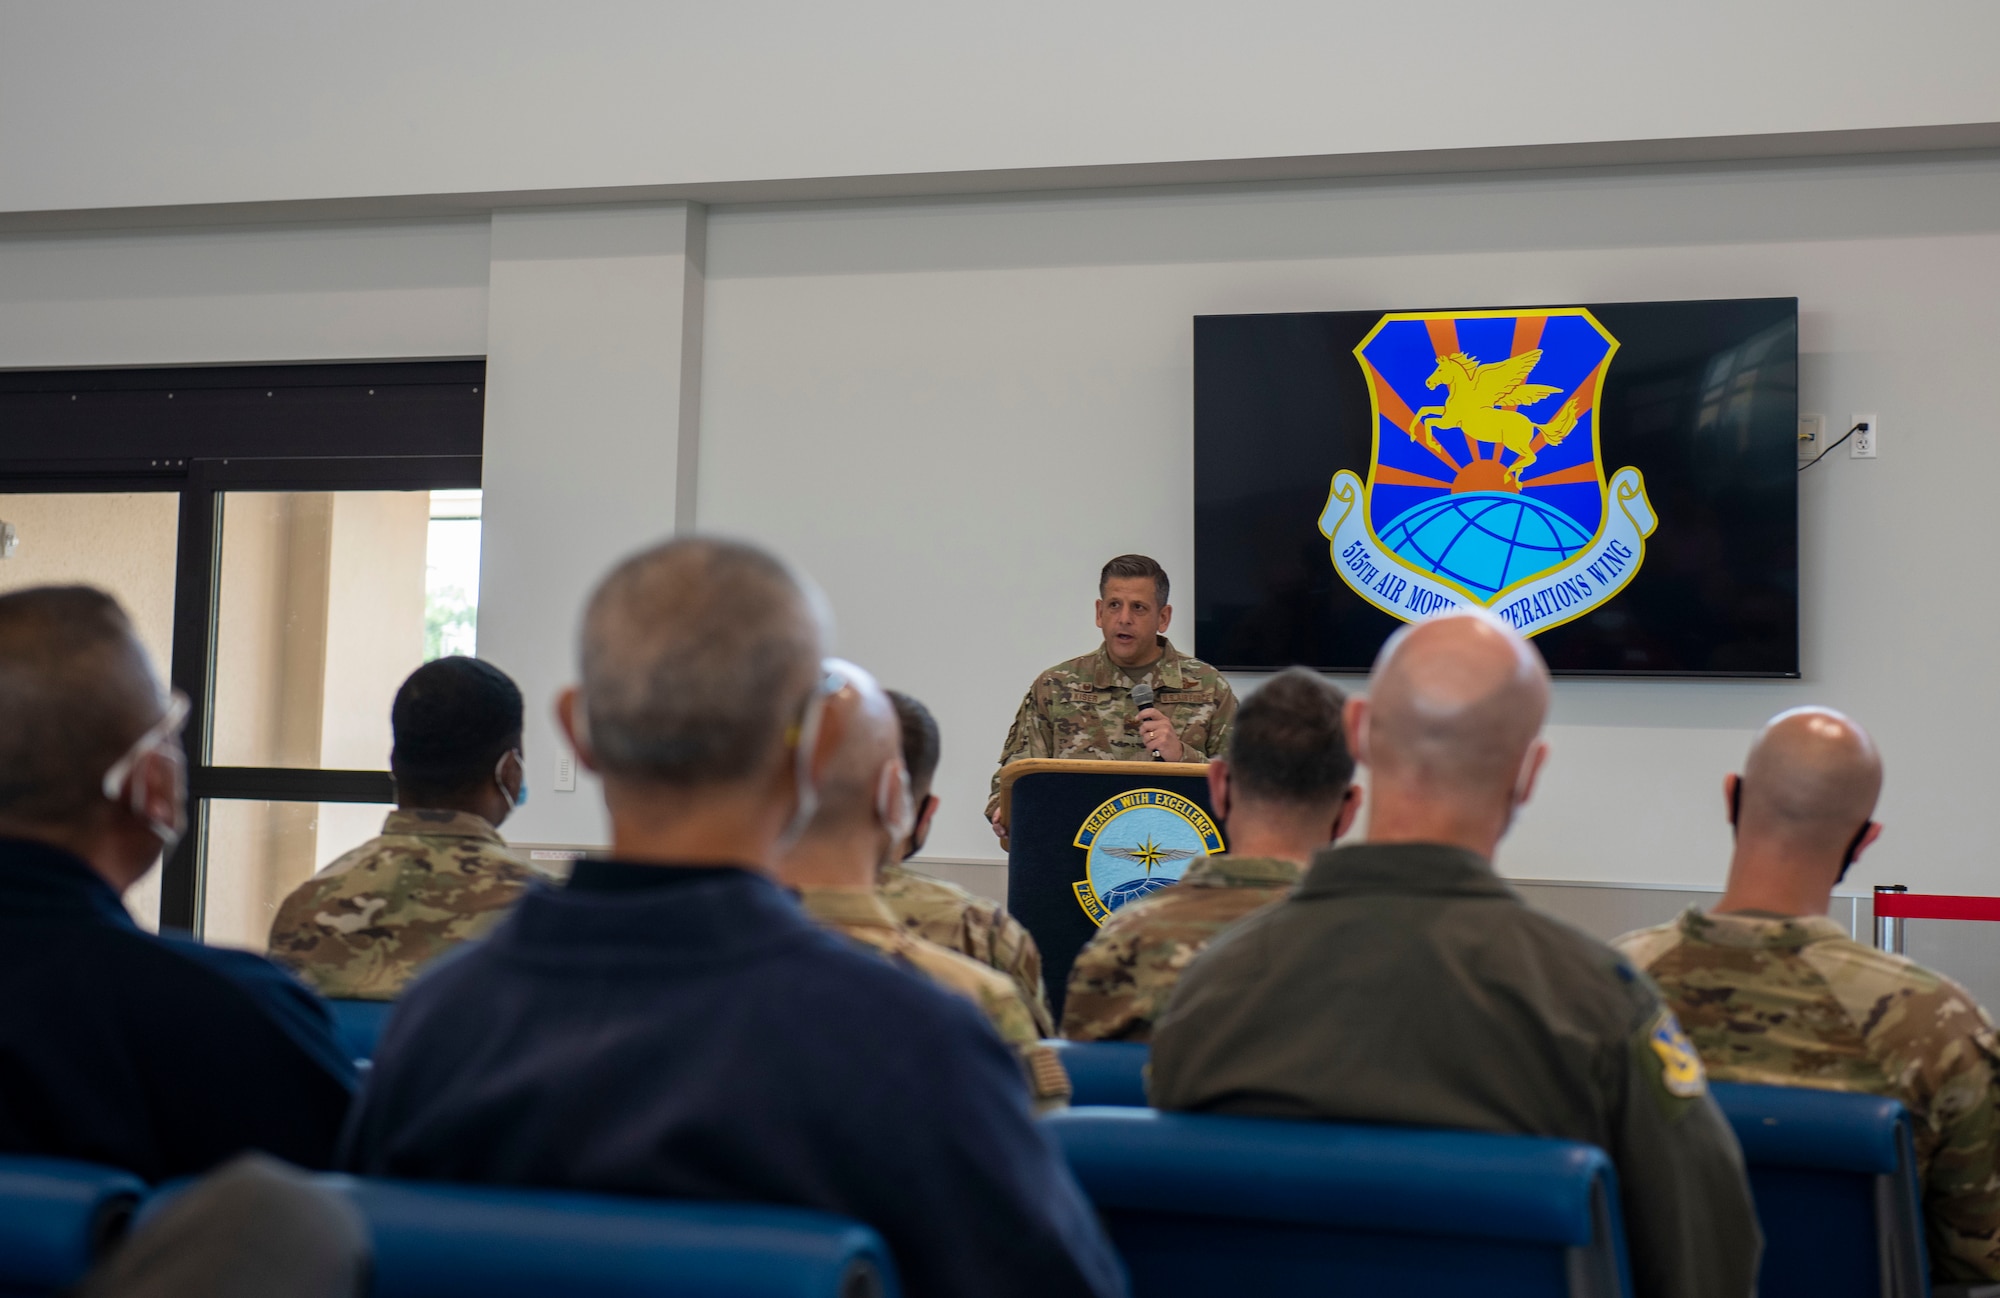 The Yokota Air Base community celebrated the opening of a new Air Mobility Command passenger terminal on Monday, June 13.